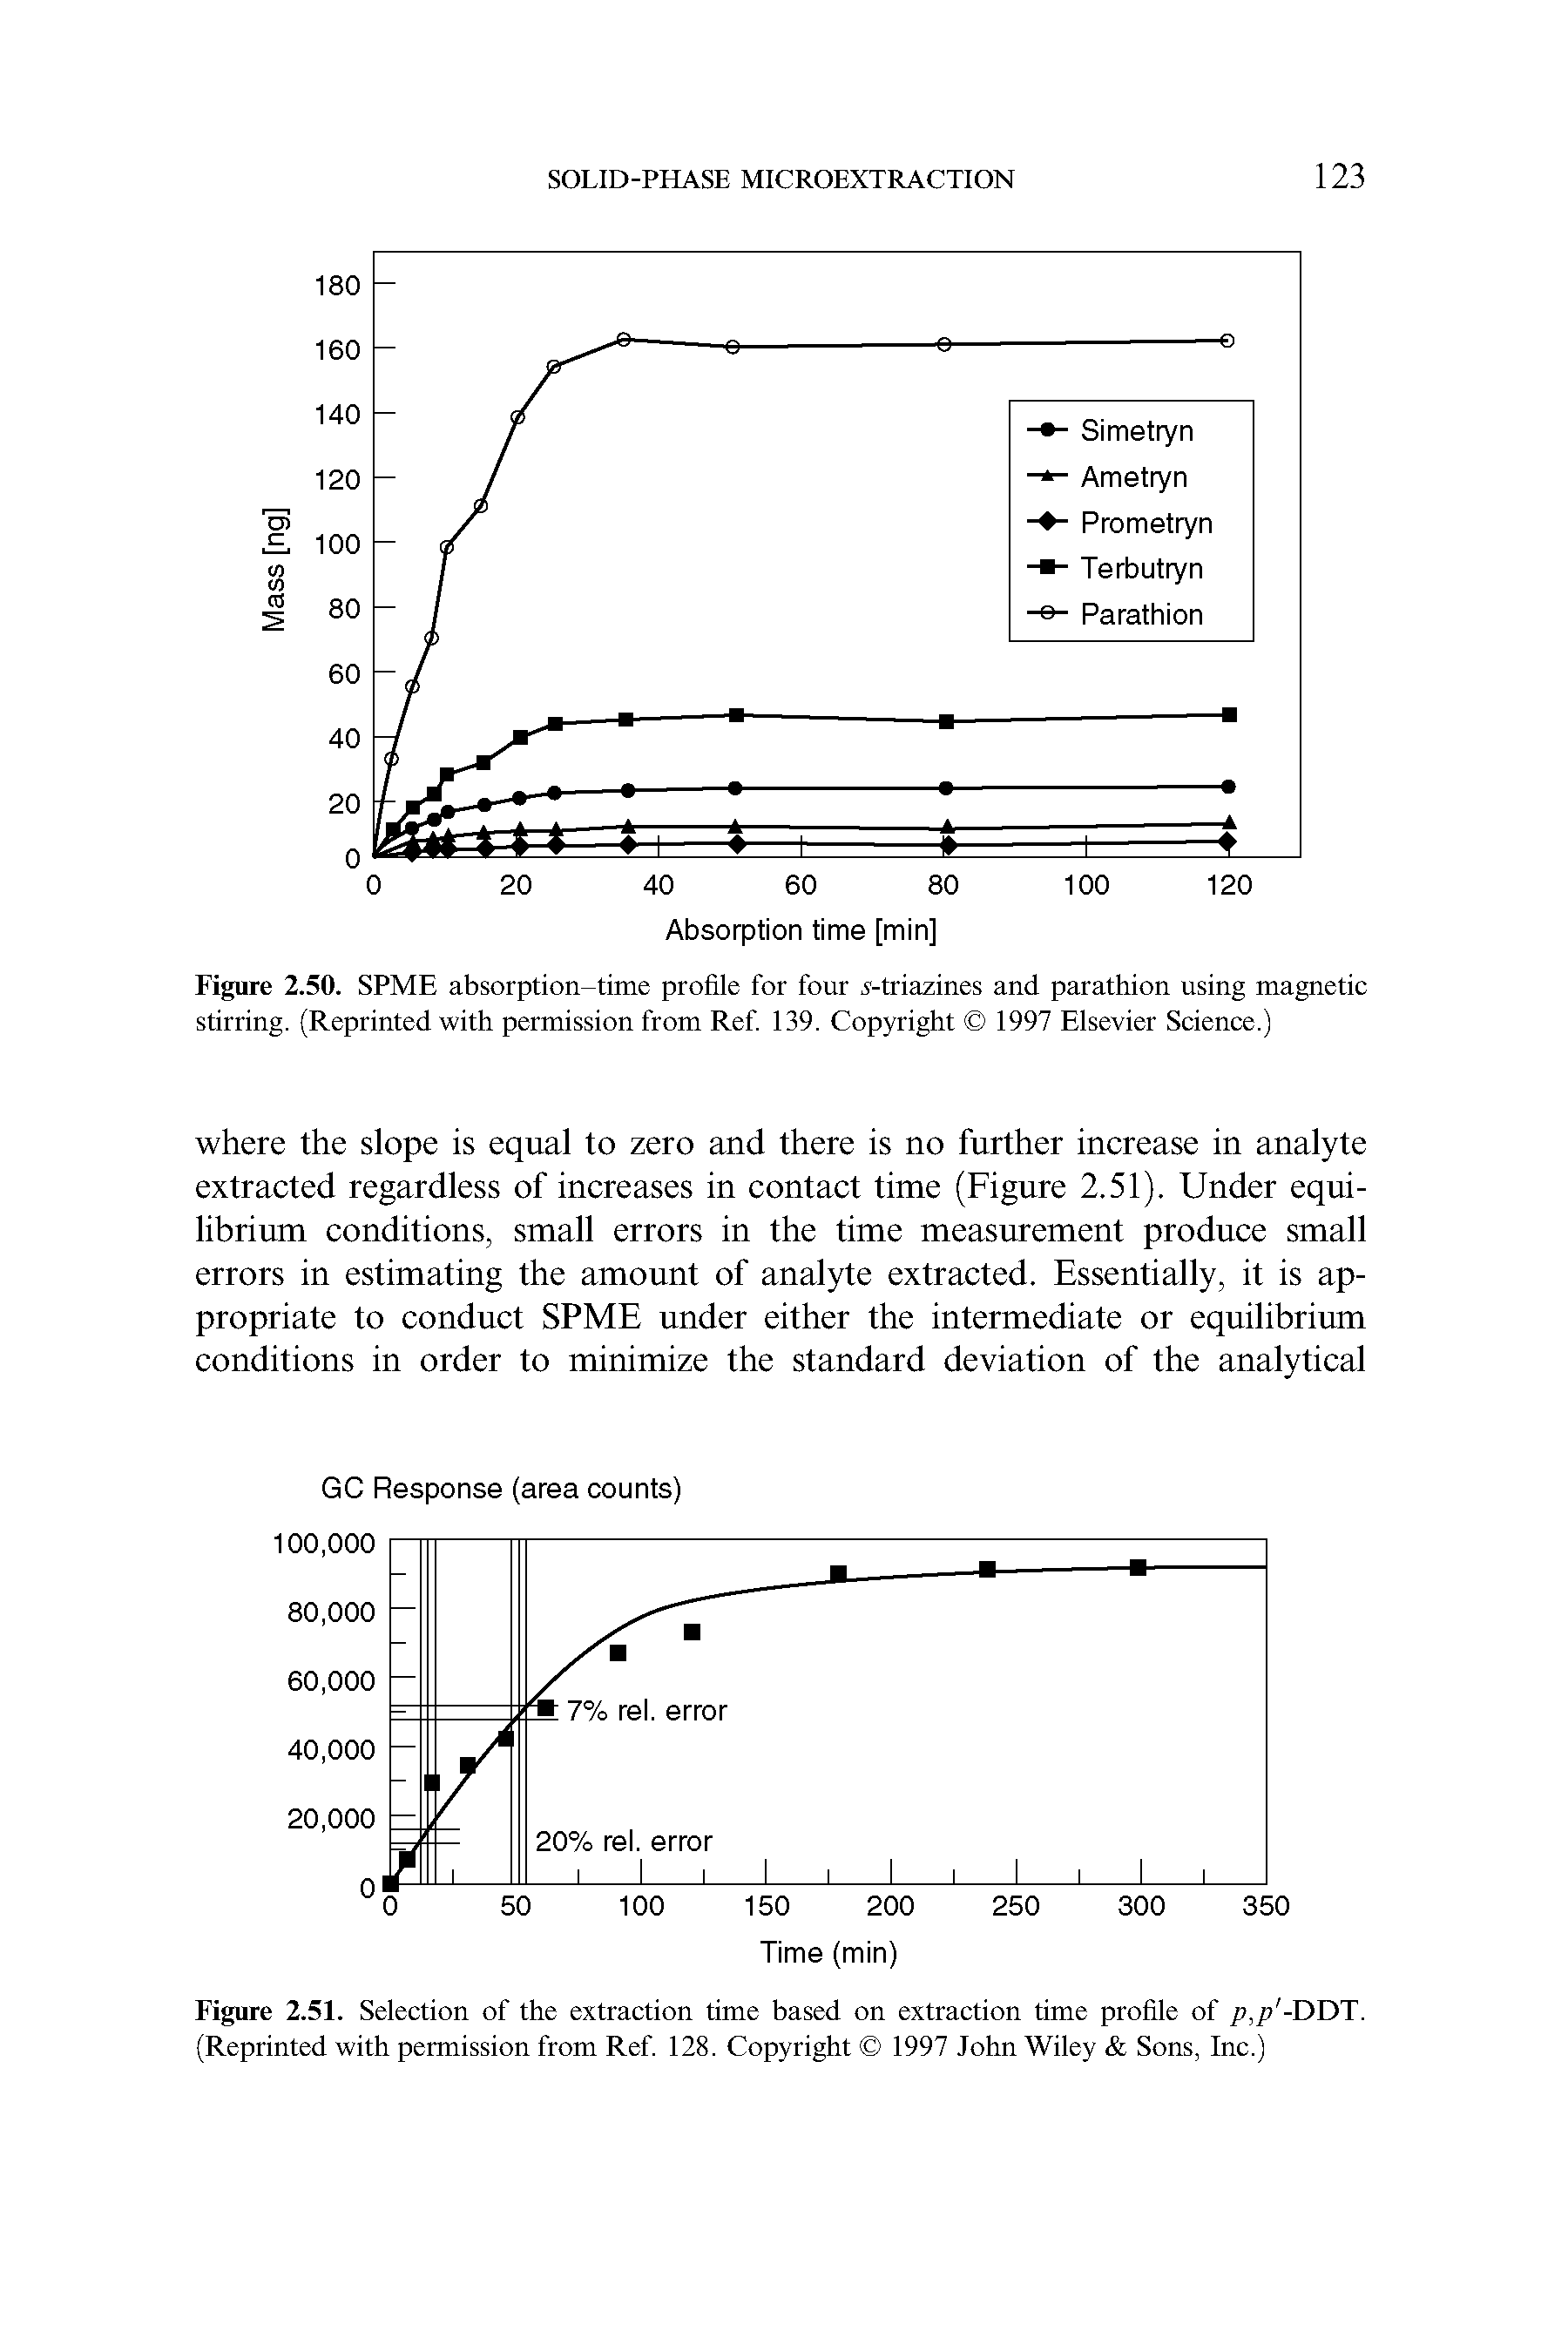 Figure 2.50. SPME absorption-time profile for four x-triazines and parathion using magnetic stirring. (Reprinted with permission from Ref. 139. Copyright 1997 Elsevier Science.)...